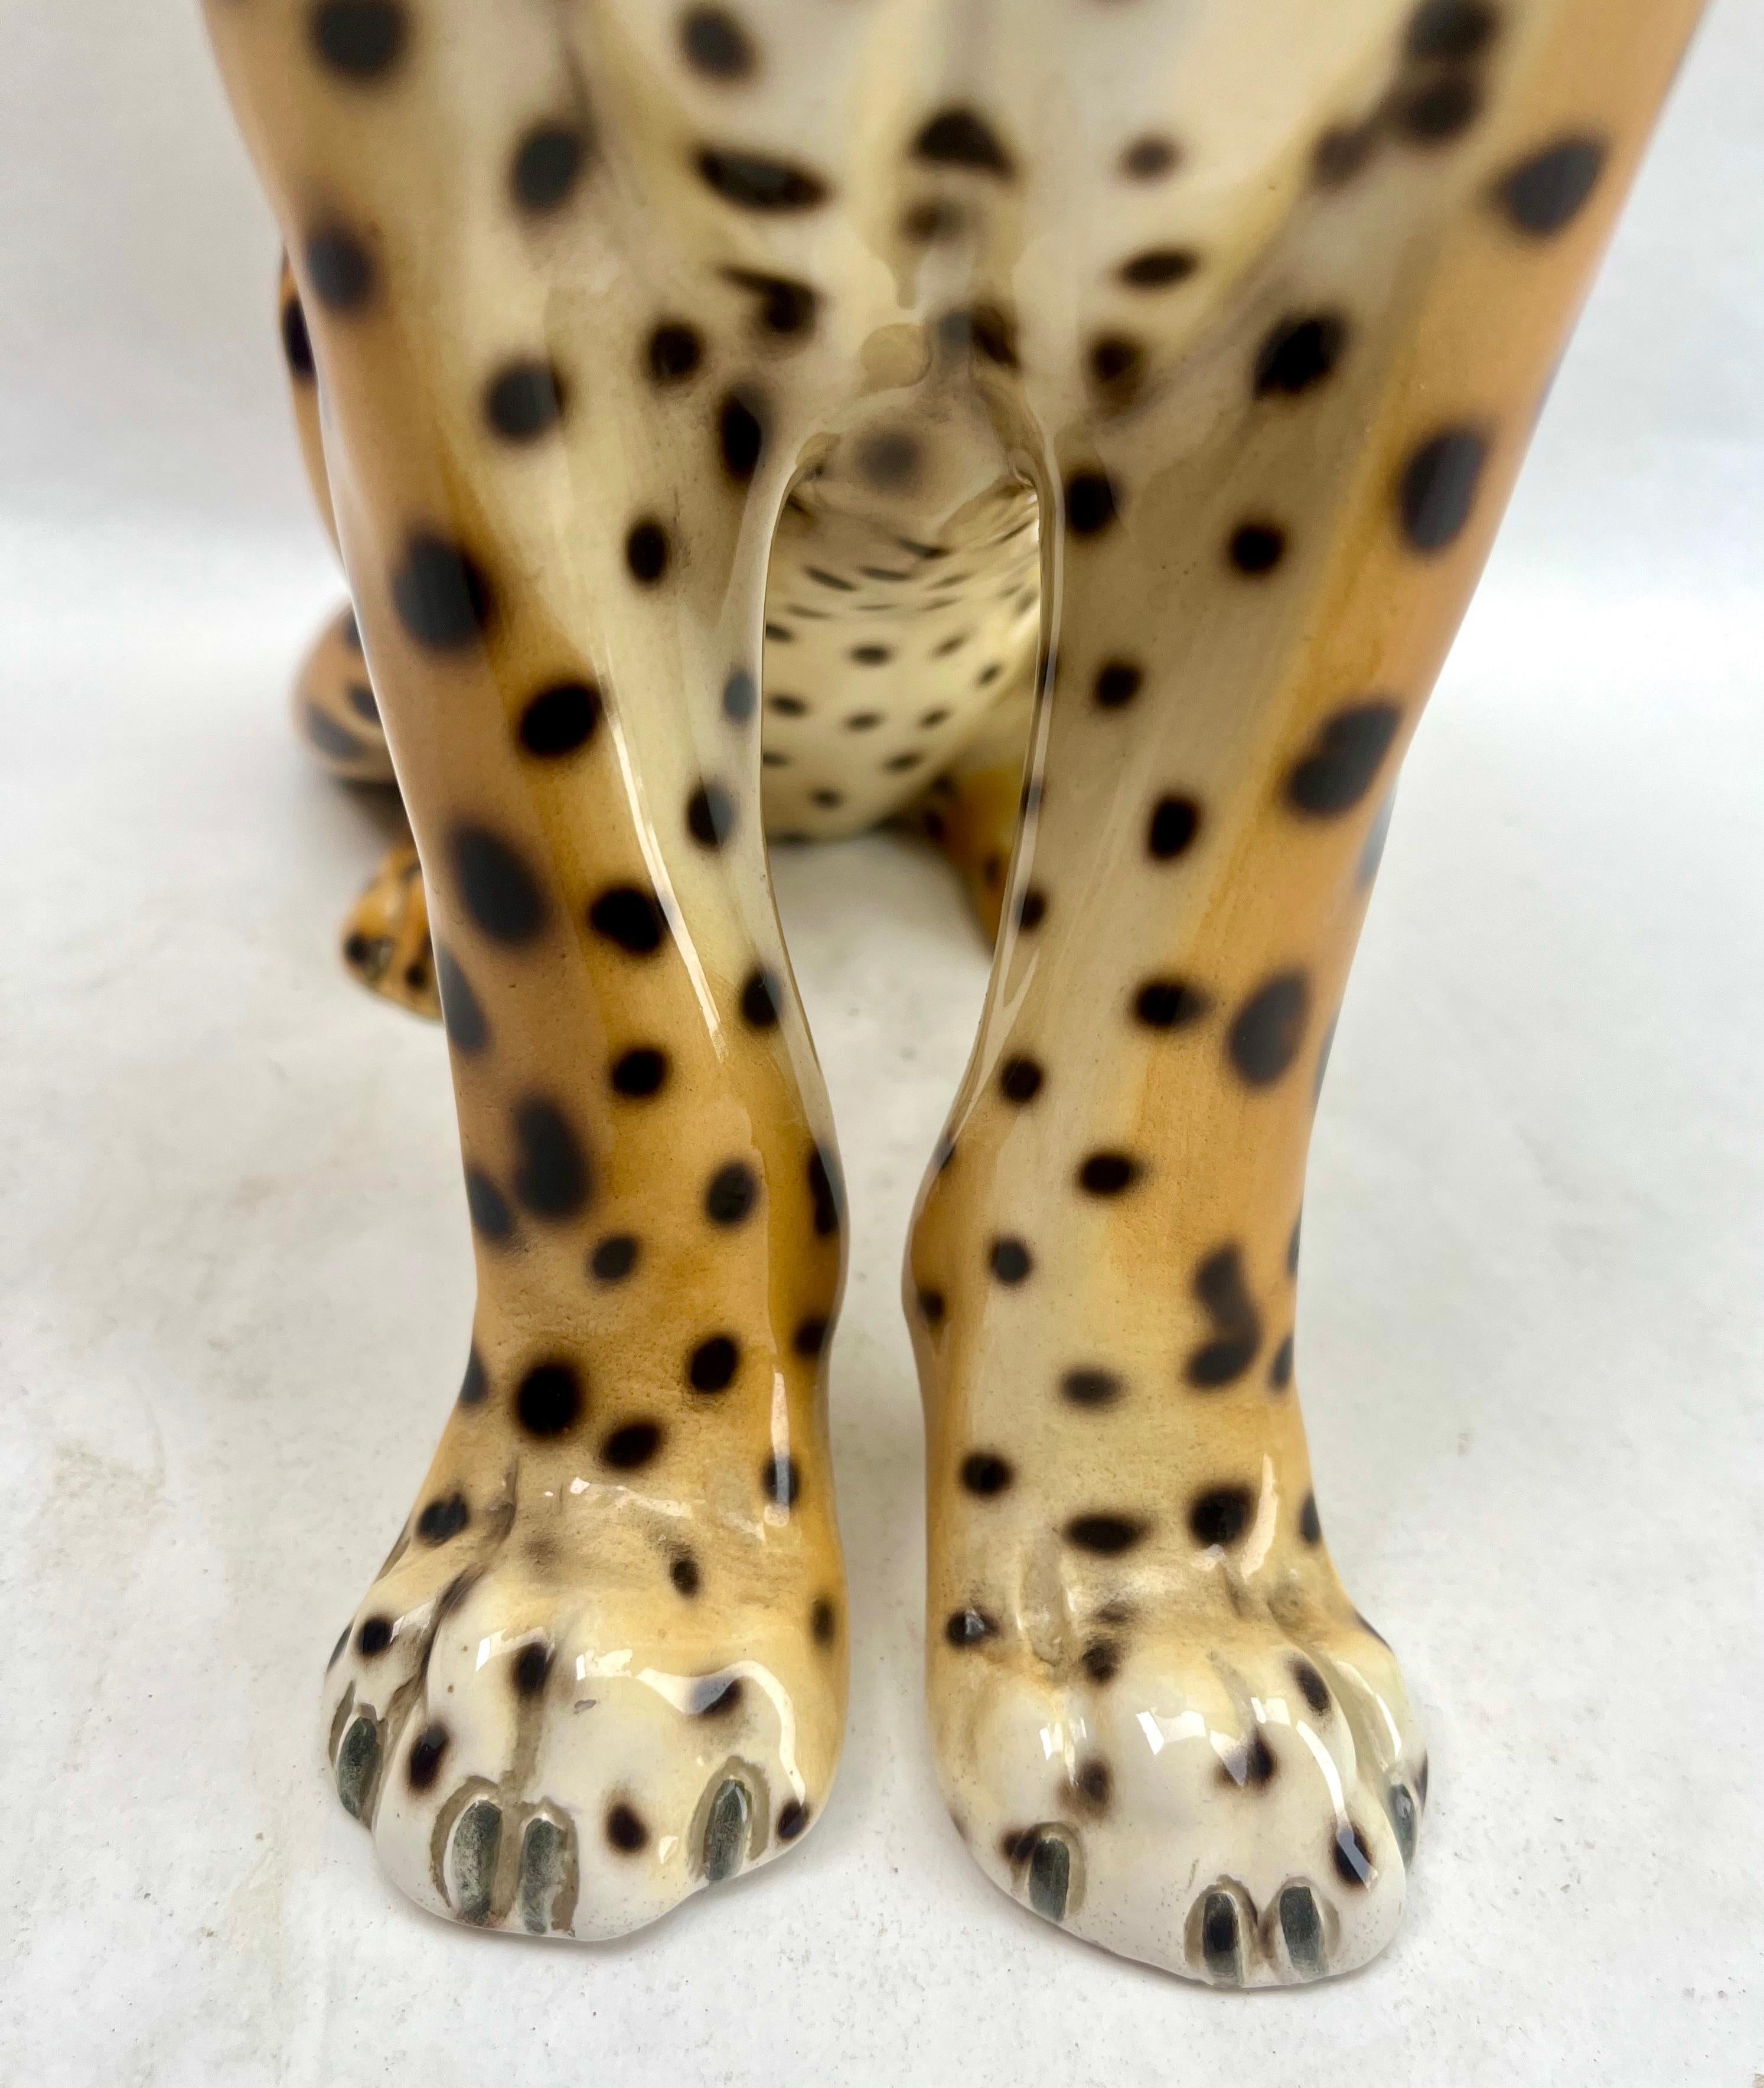 Stylish Ceramic Glazed Handpainted leopard Sculpture Ronzan Signed, Italy, 1950s For Sale 5